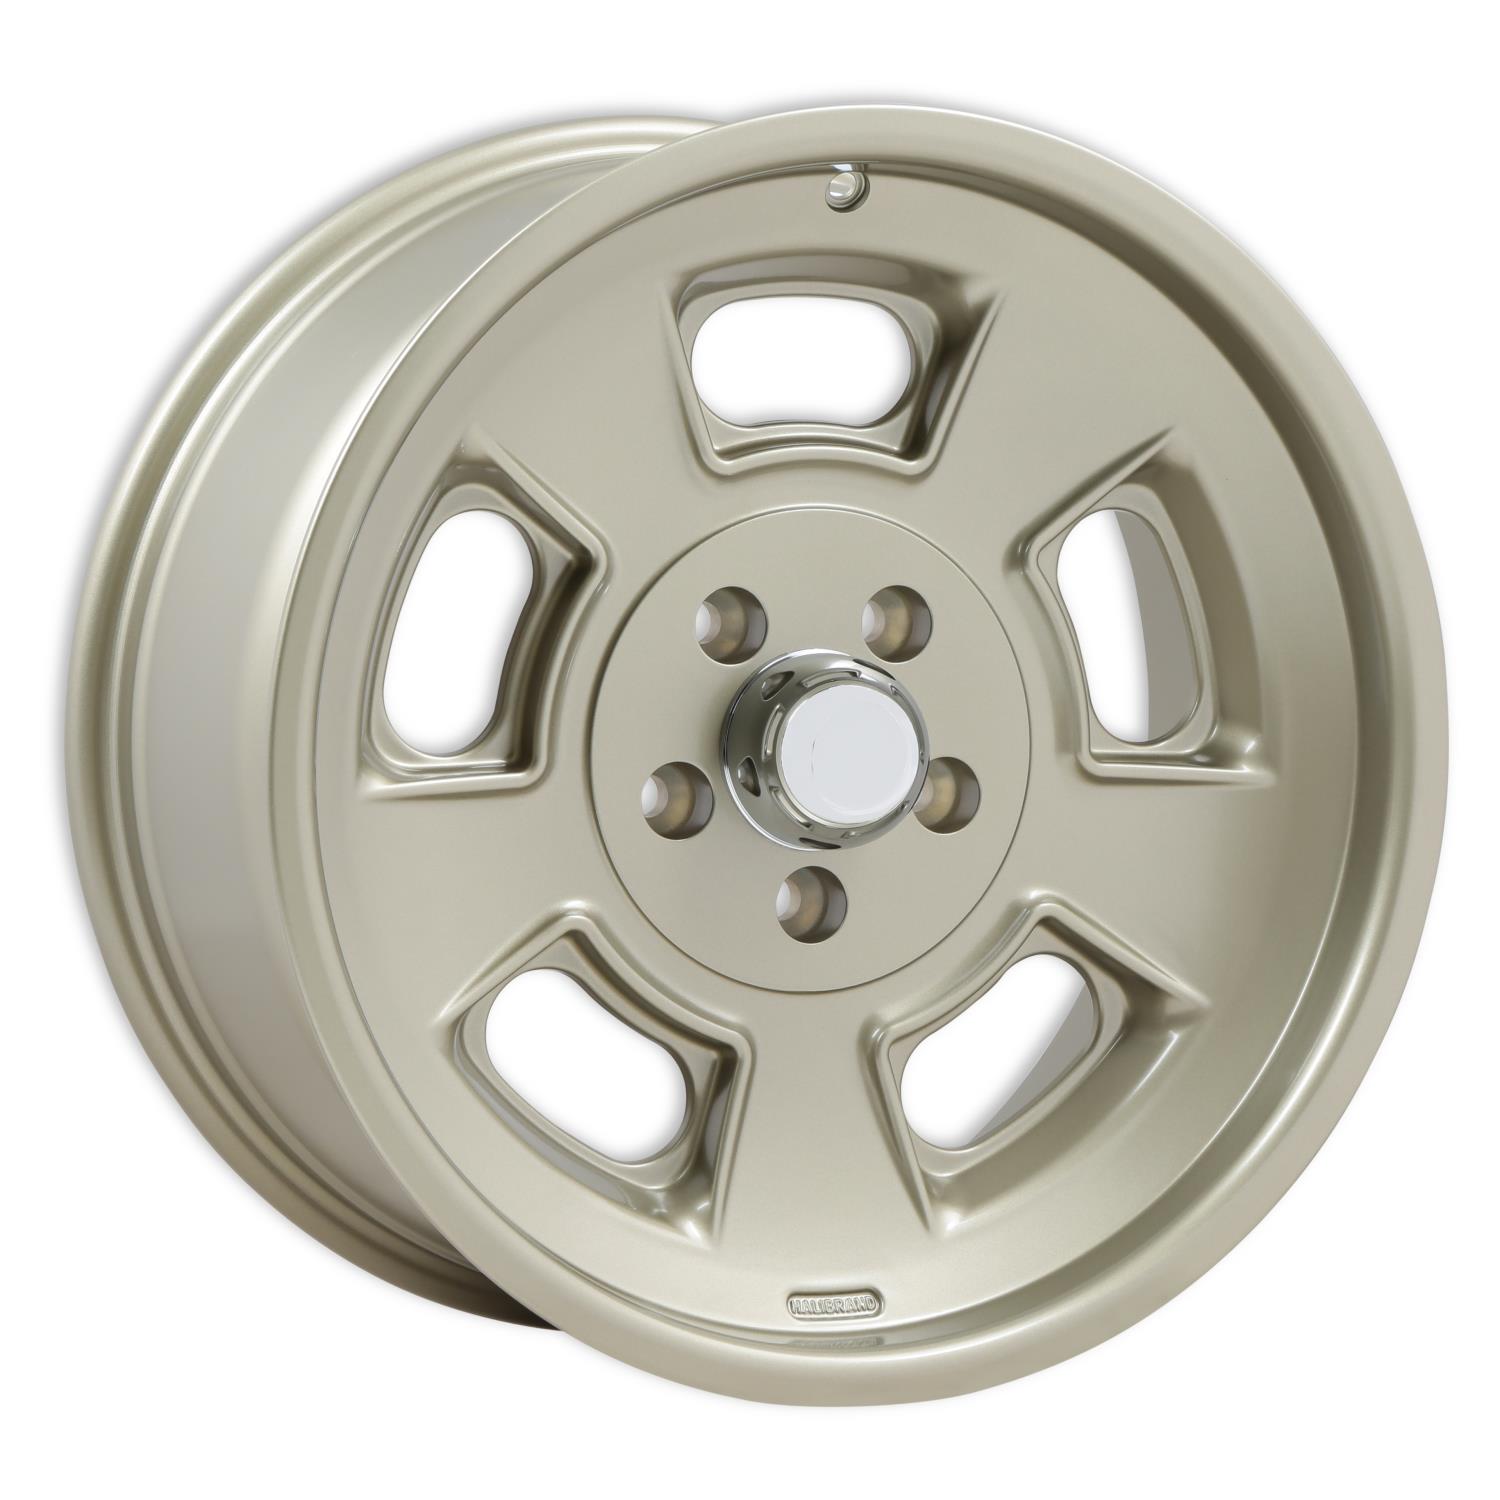 Sprint Front Wheel, Size: 19x8.5", Bolt Pattern: 5x5", Backspace: 5.25" [MAG7 - Semi Gloss Clearcoat]